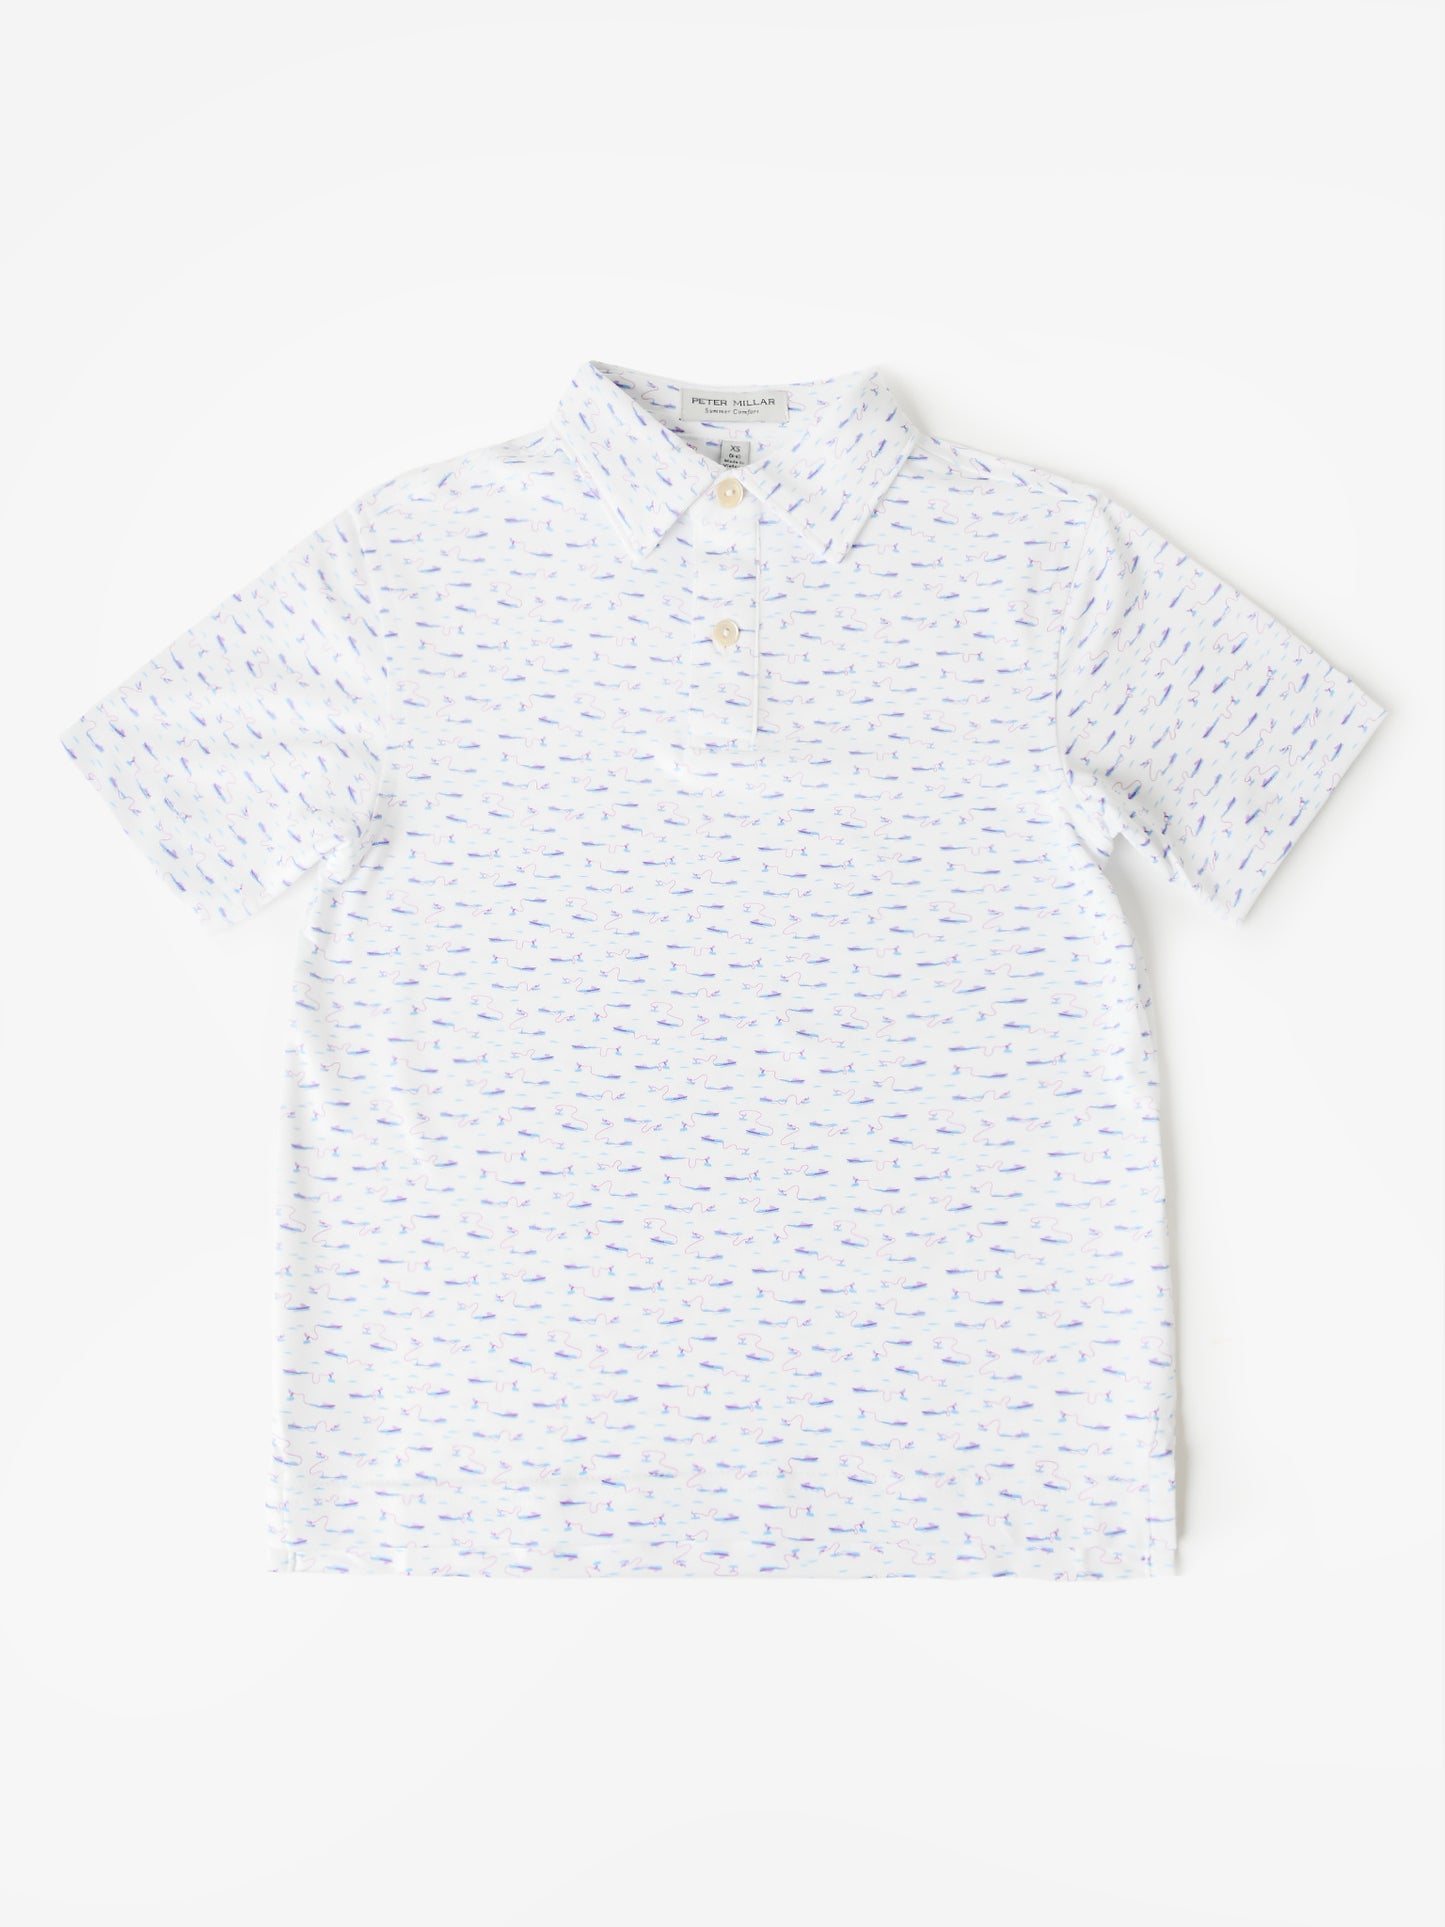 Peter Millar Youth Collection Boys' Cypress Performance Jersey Polo